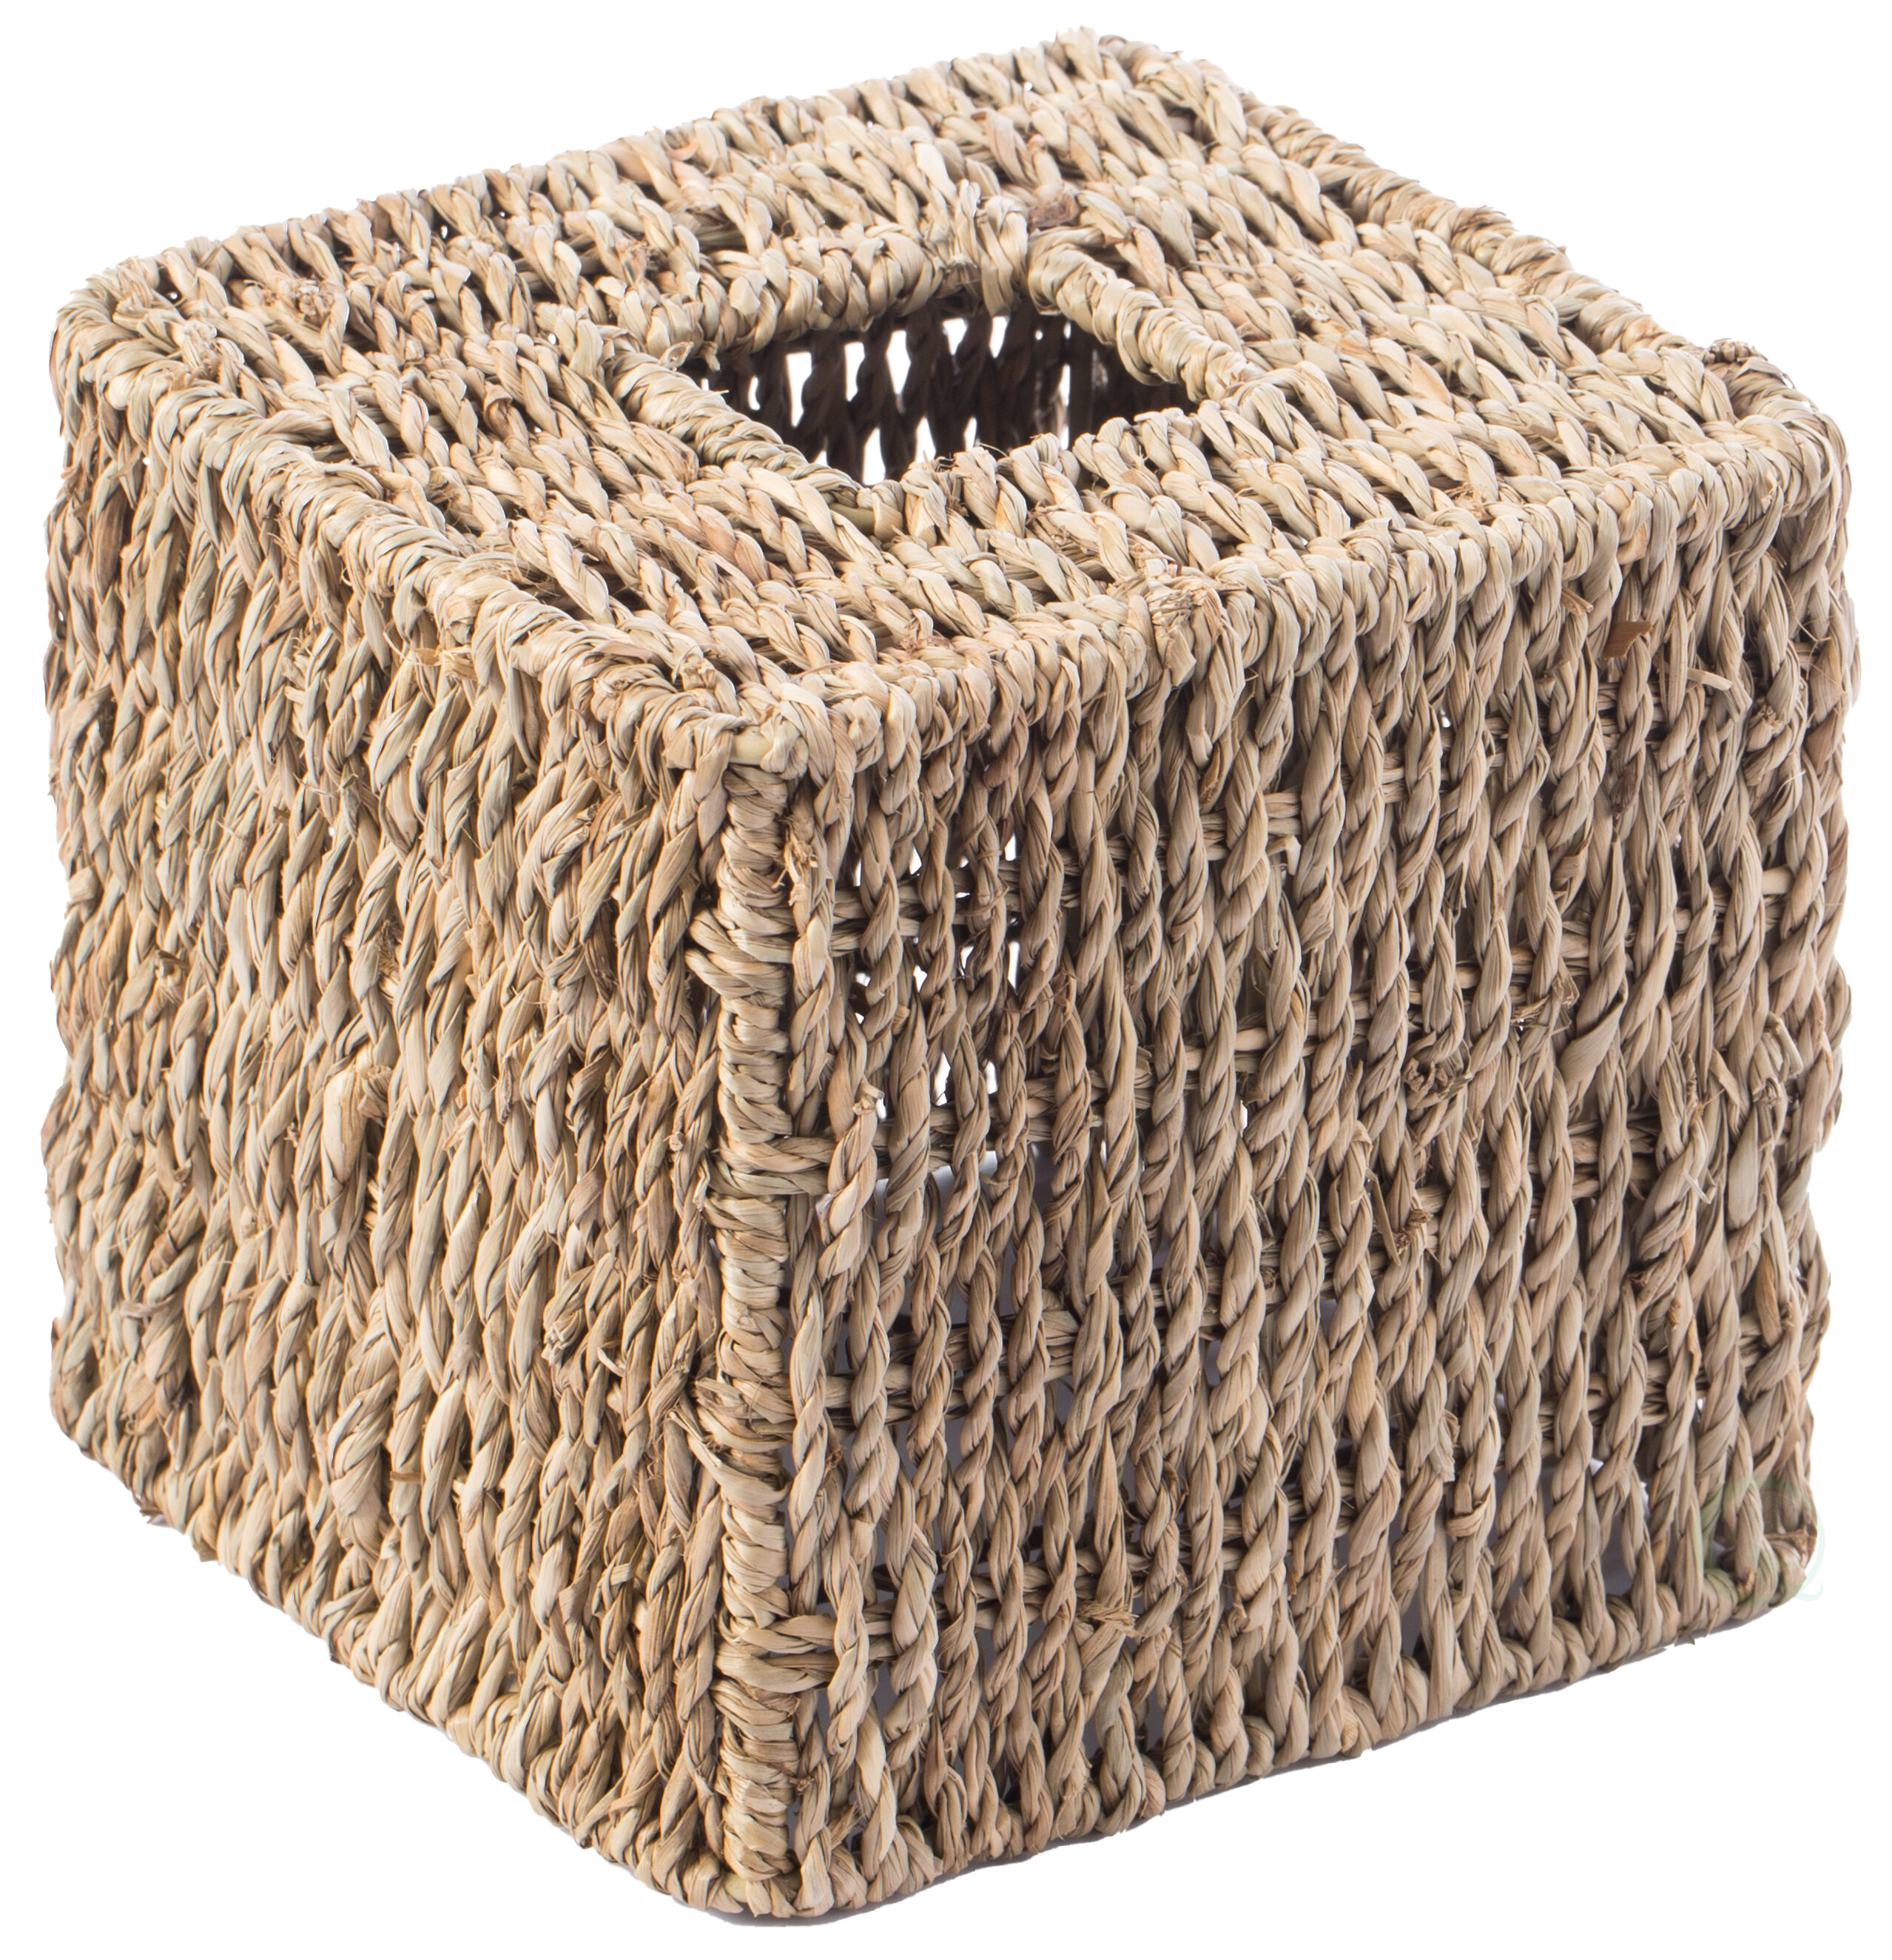 Original by Homeloo Seagrass Straw Rectangular Tissue Box Cover Holder